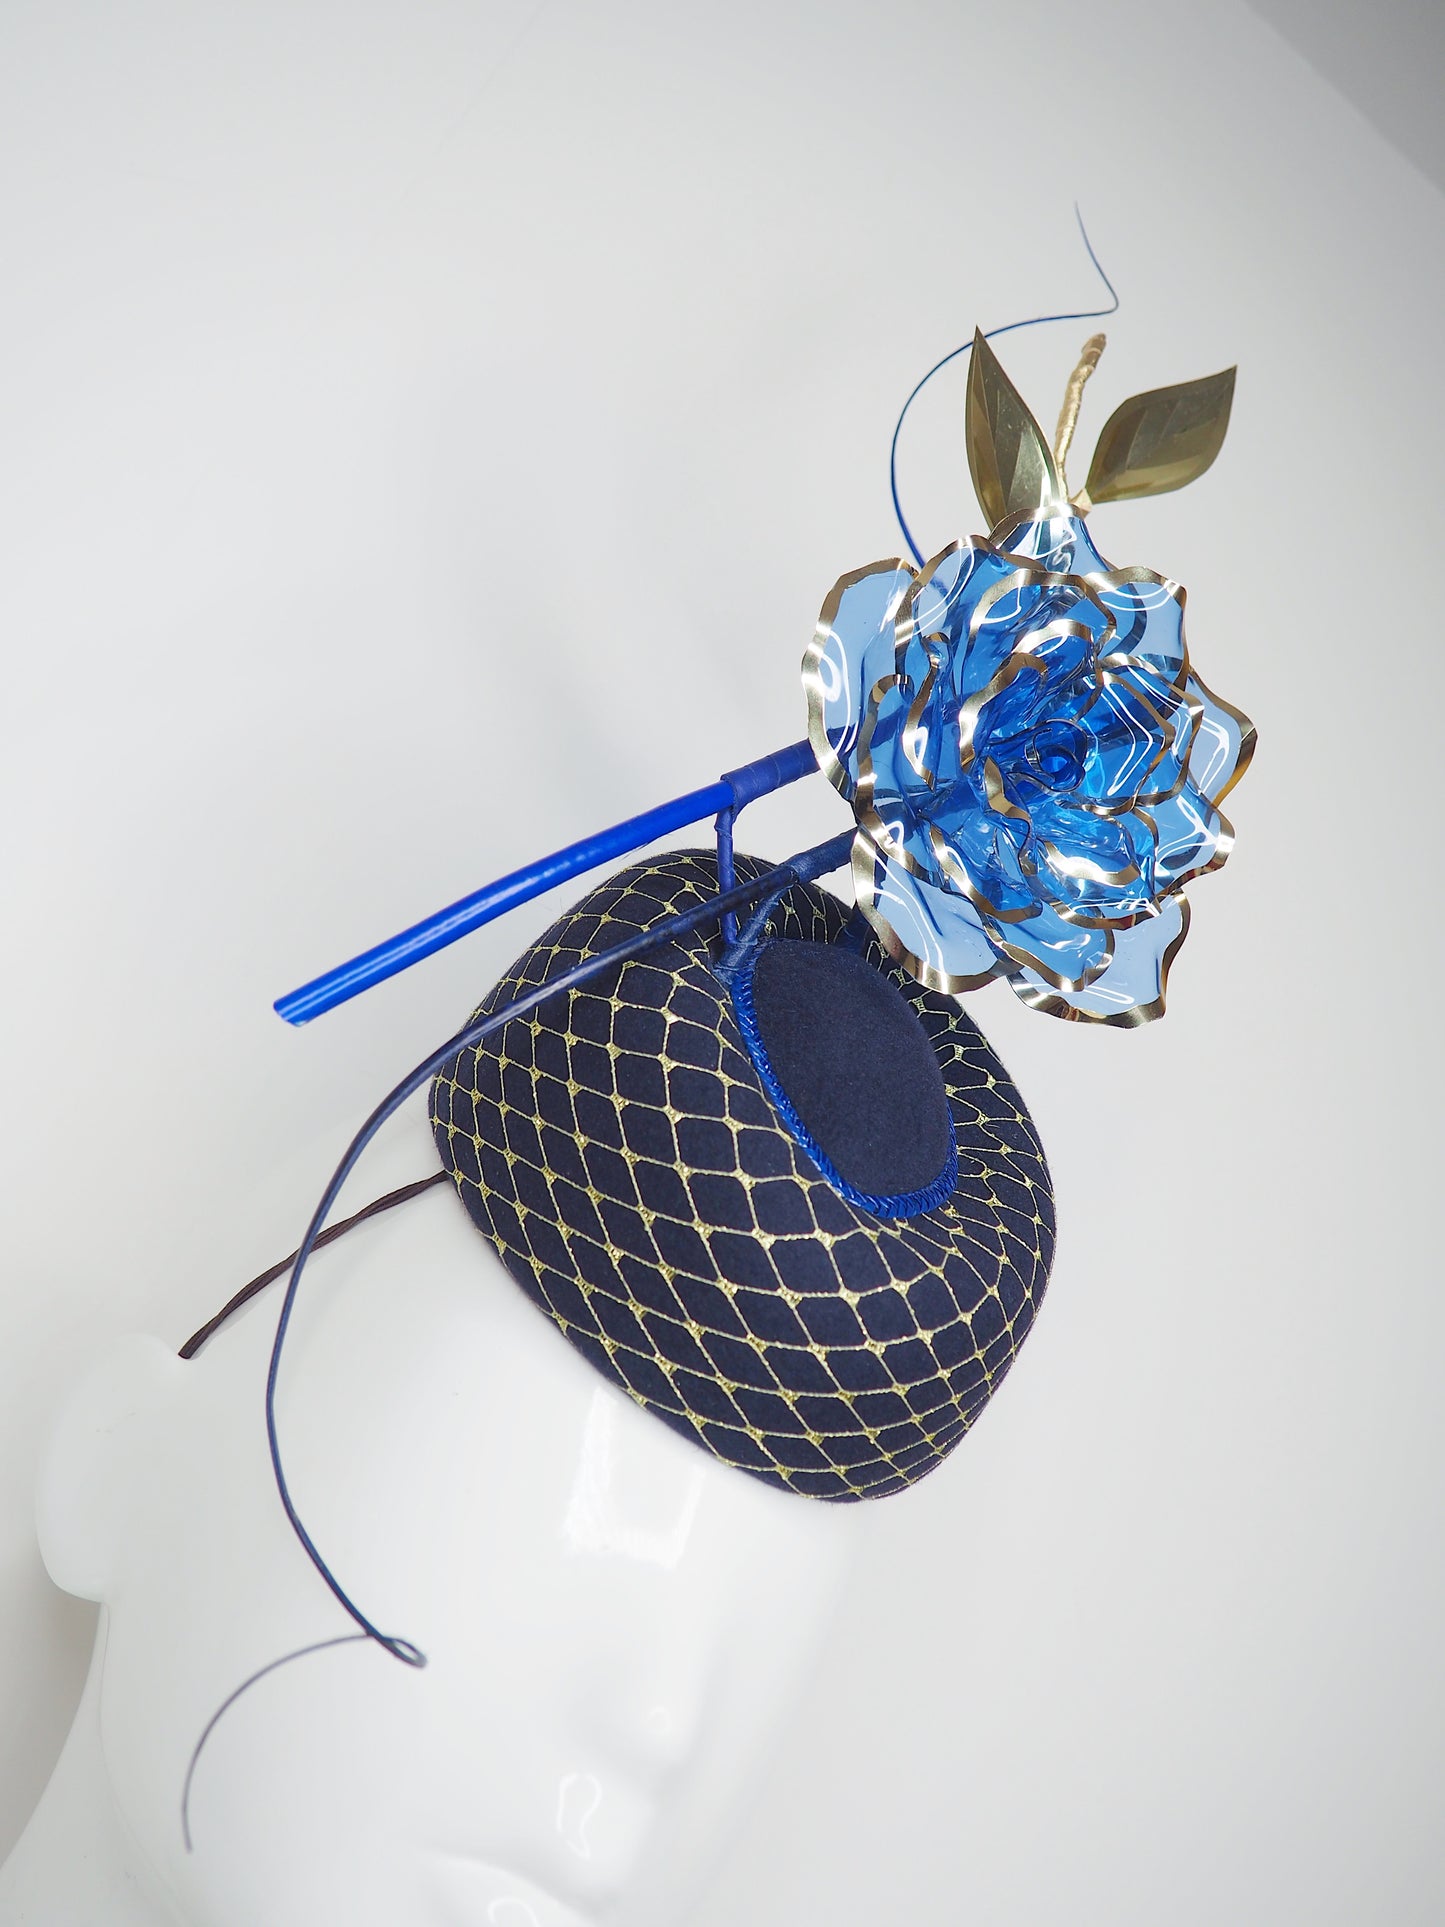 Royal Rose - Blue fur felt pork pie pillbox with Blue crystoform rose and touches of gold